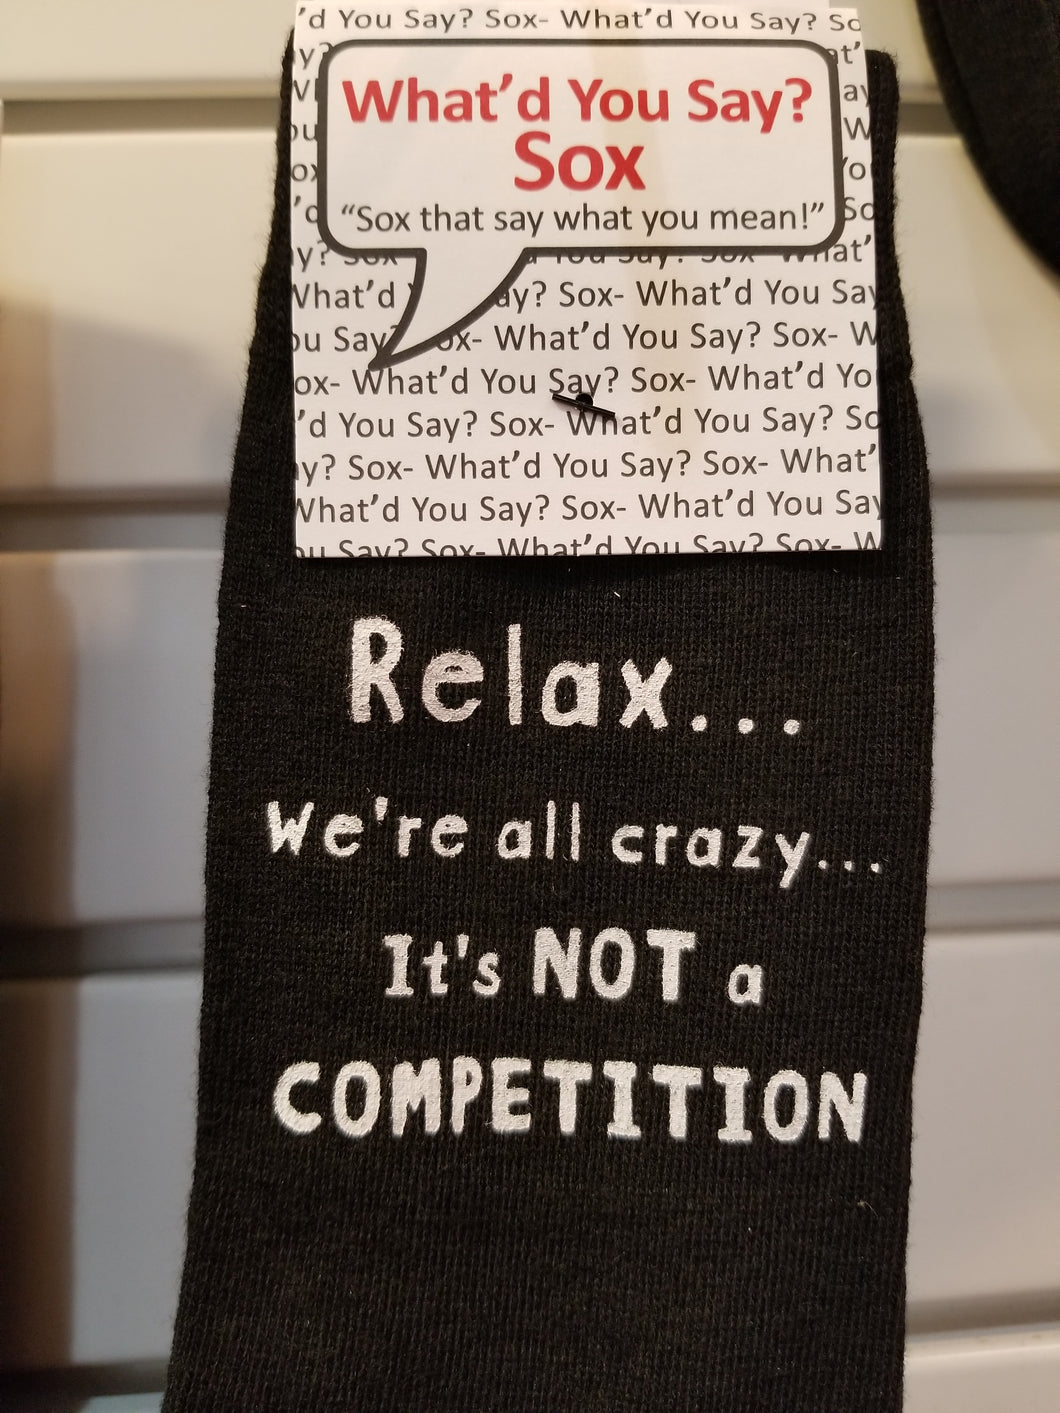 Relax, we're all crazy - Sox